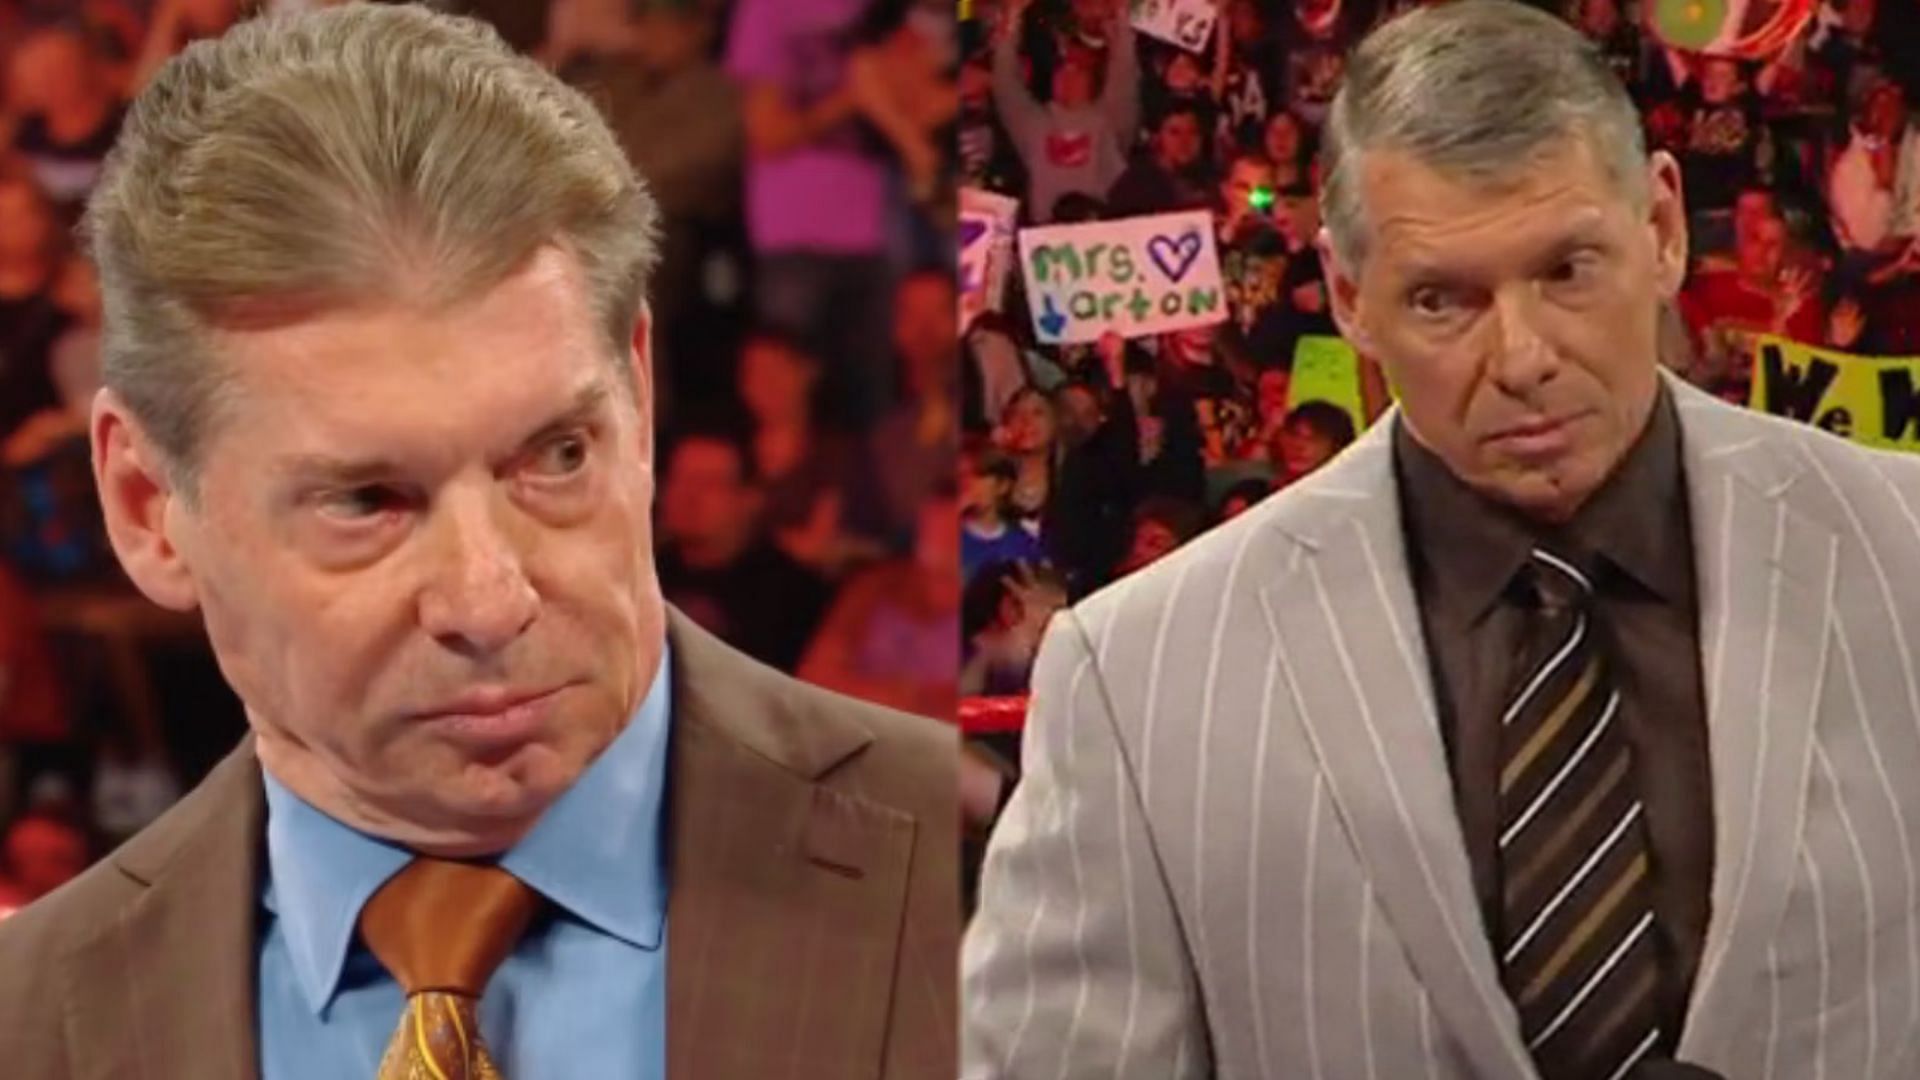 Fans have not always been happy with Vince McMahon